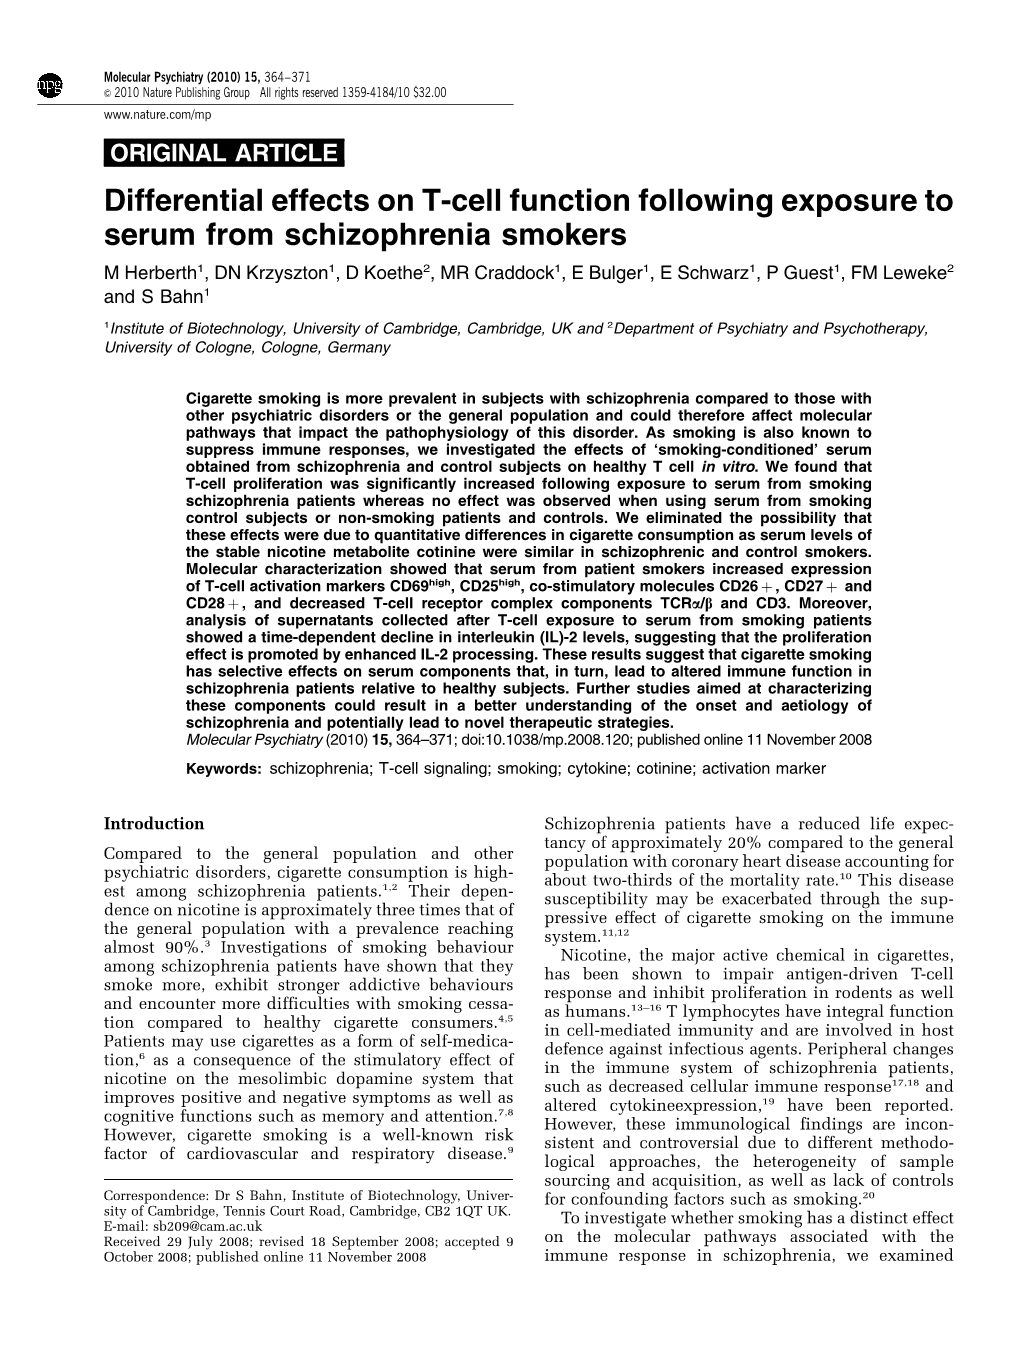 Differential Effects on T-Cell Function Following Exposure to Serum From